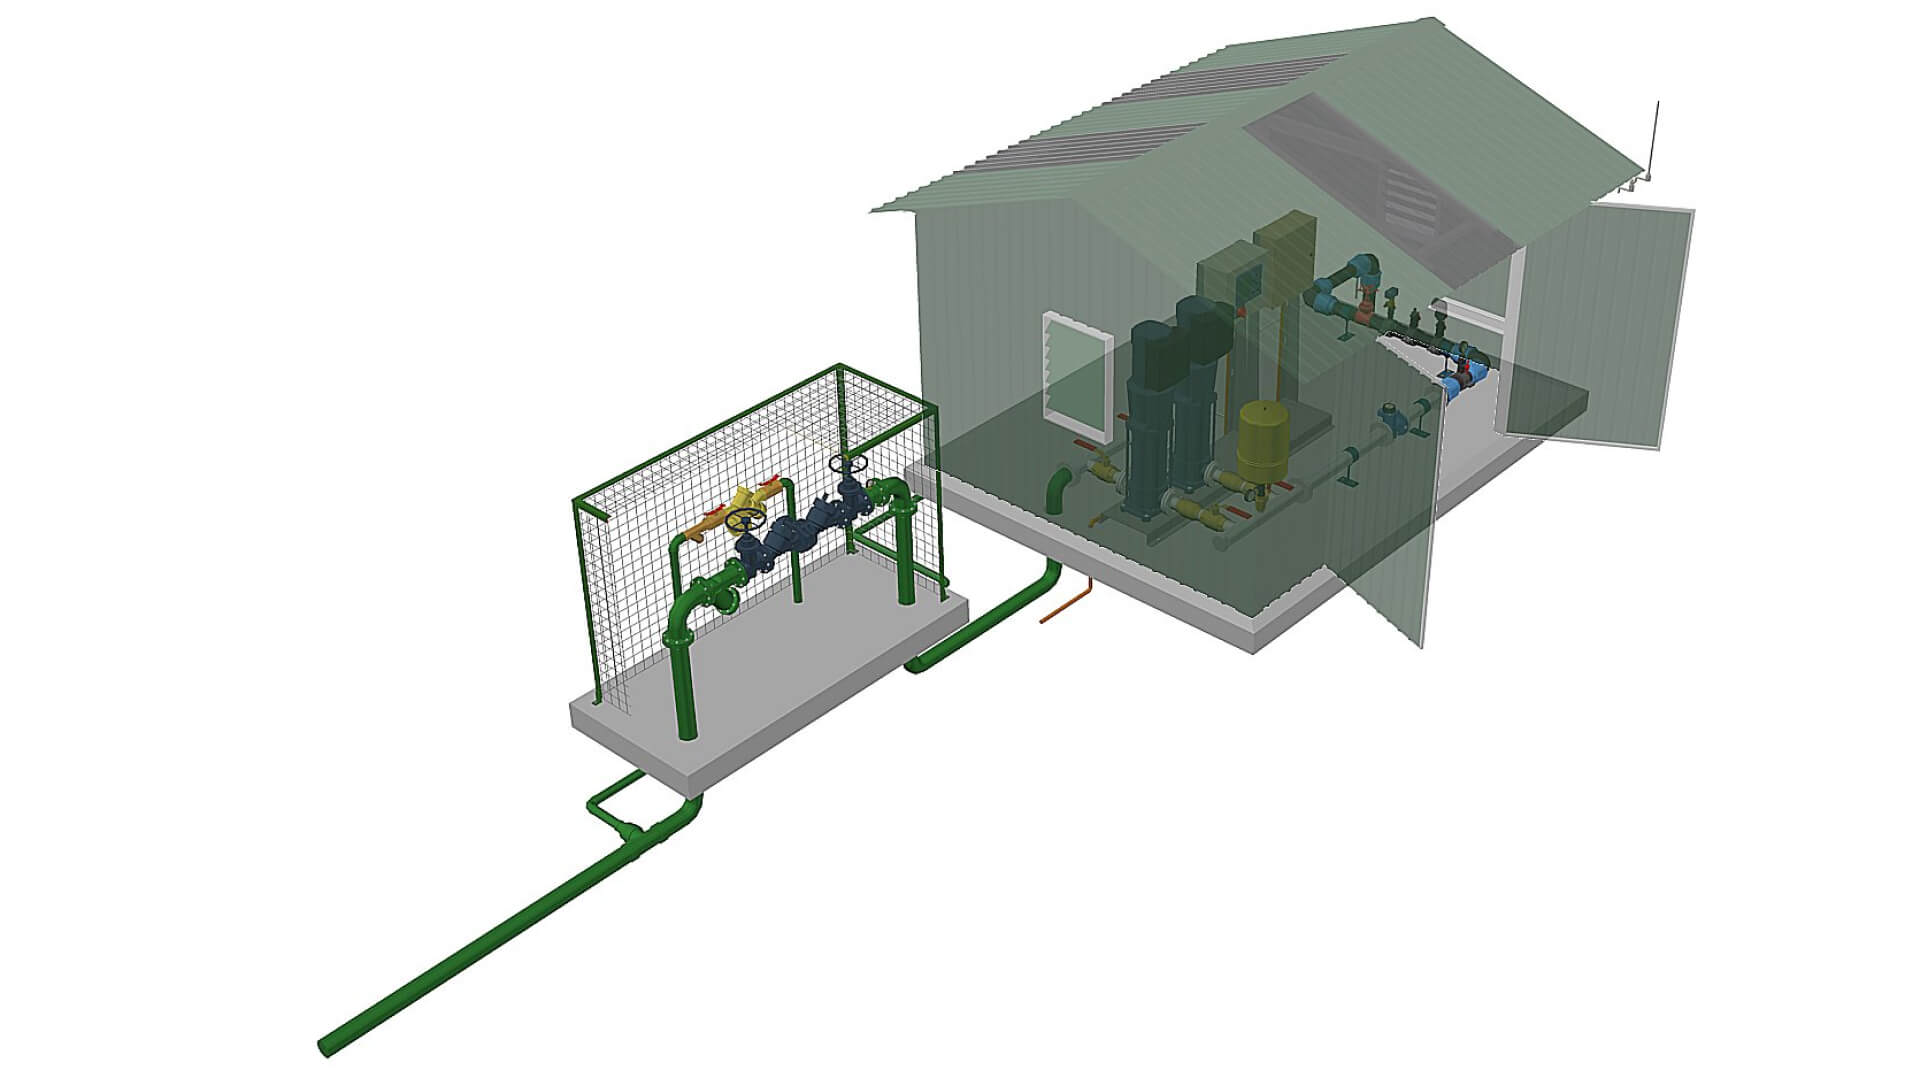 A 3D CAD rendering of an agricultural irrigation pump system